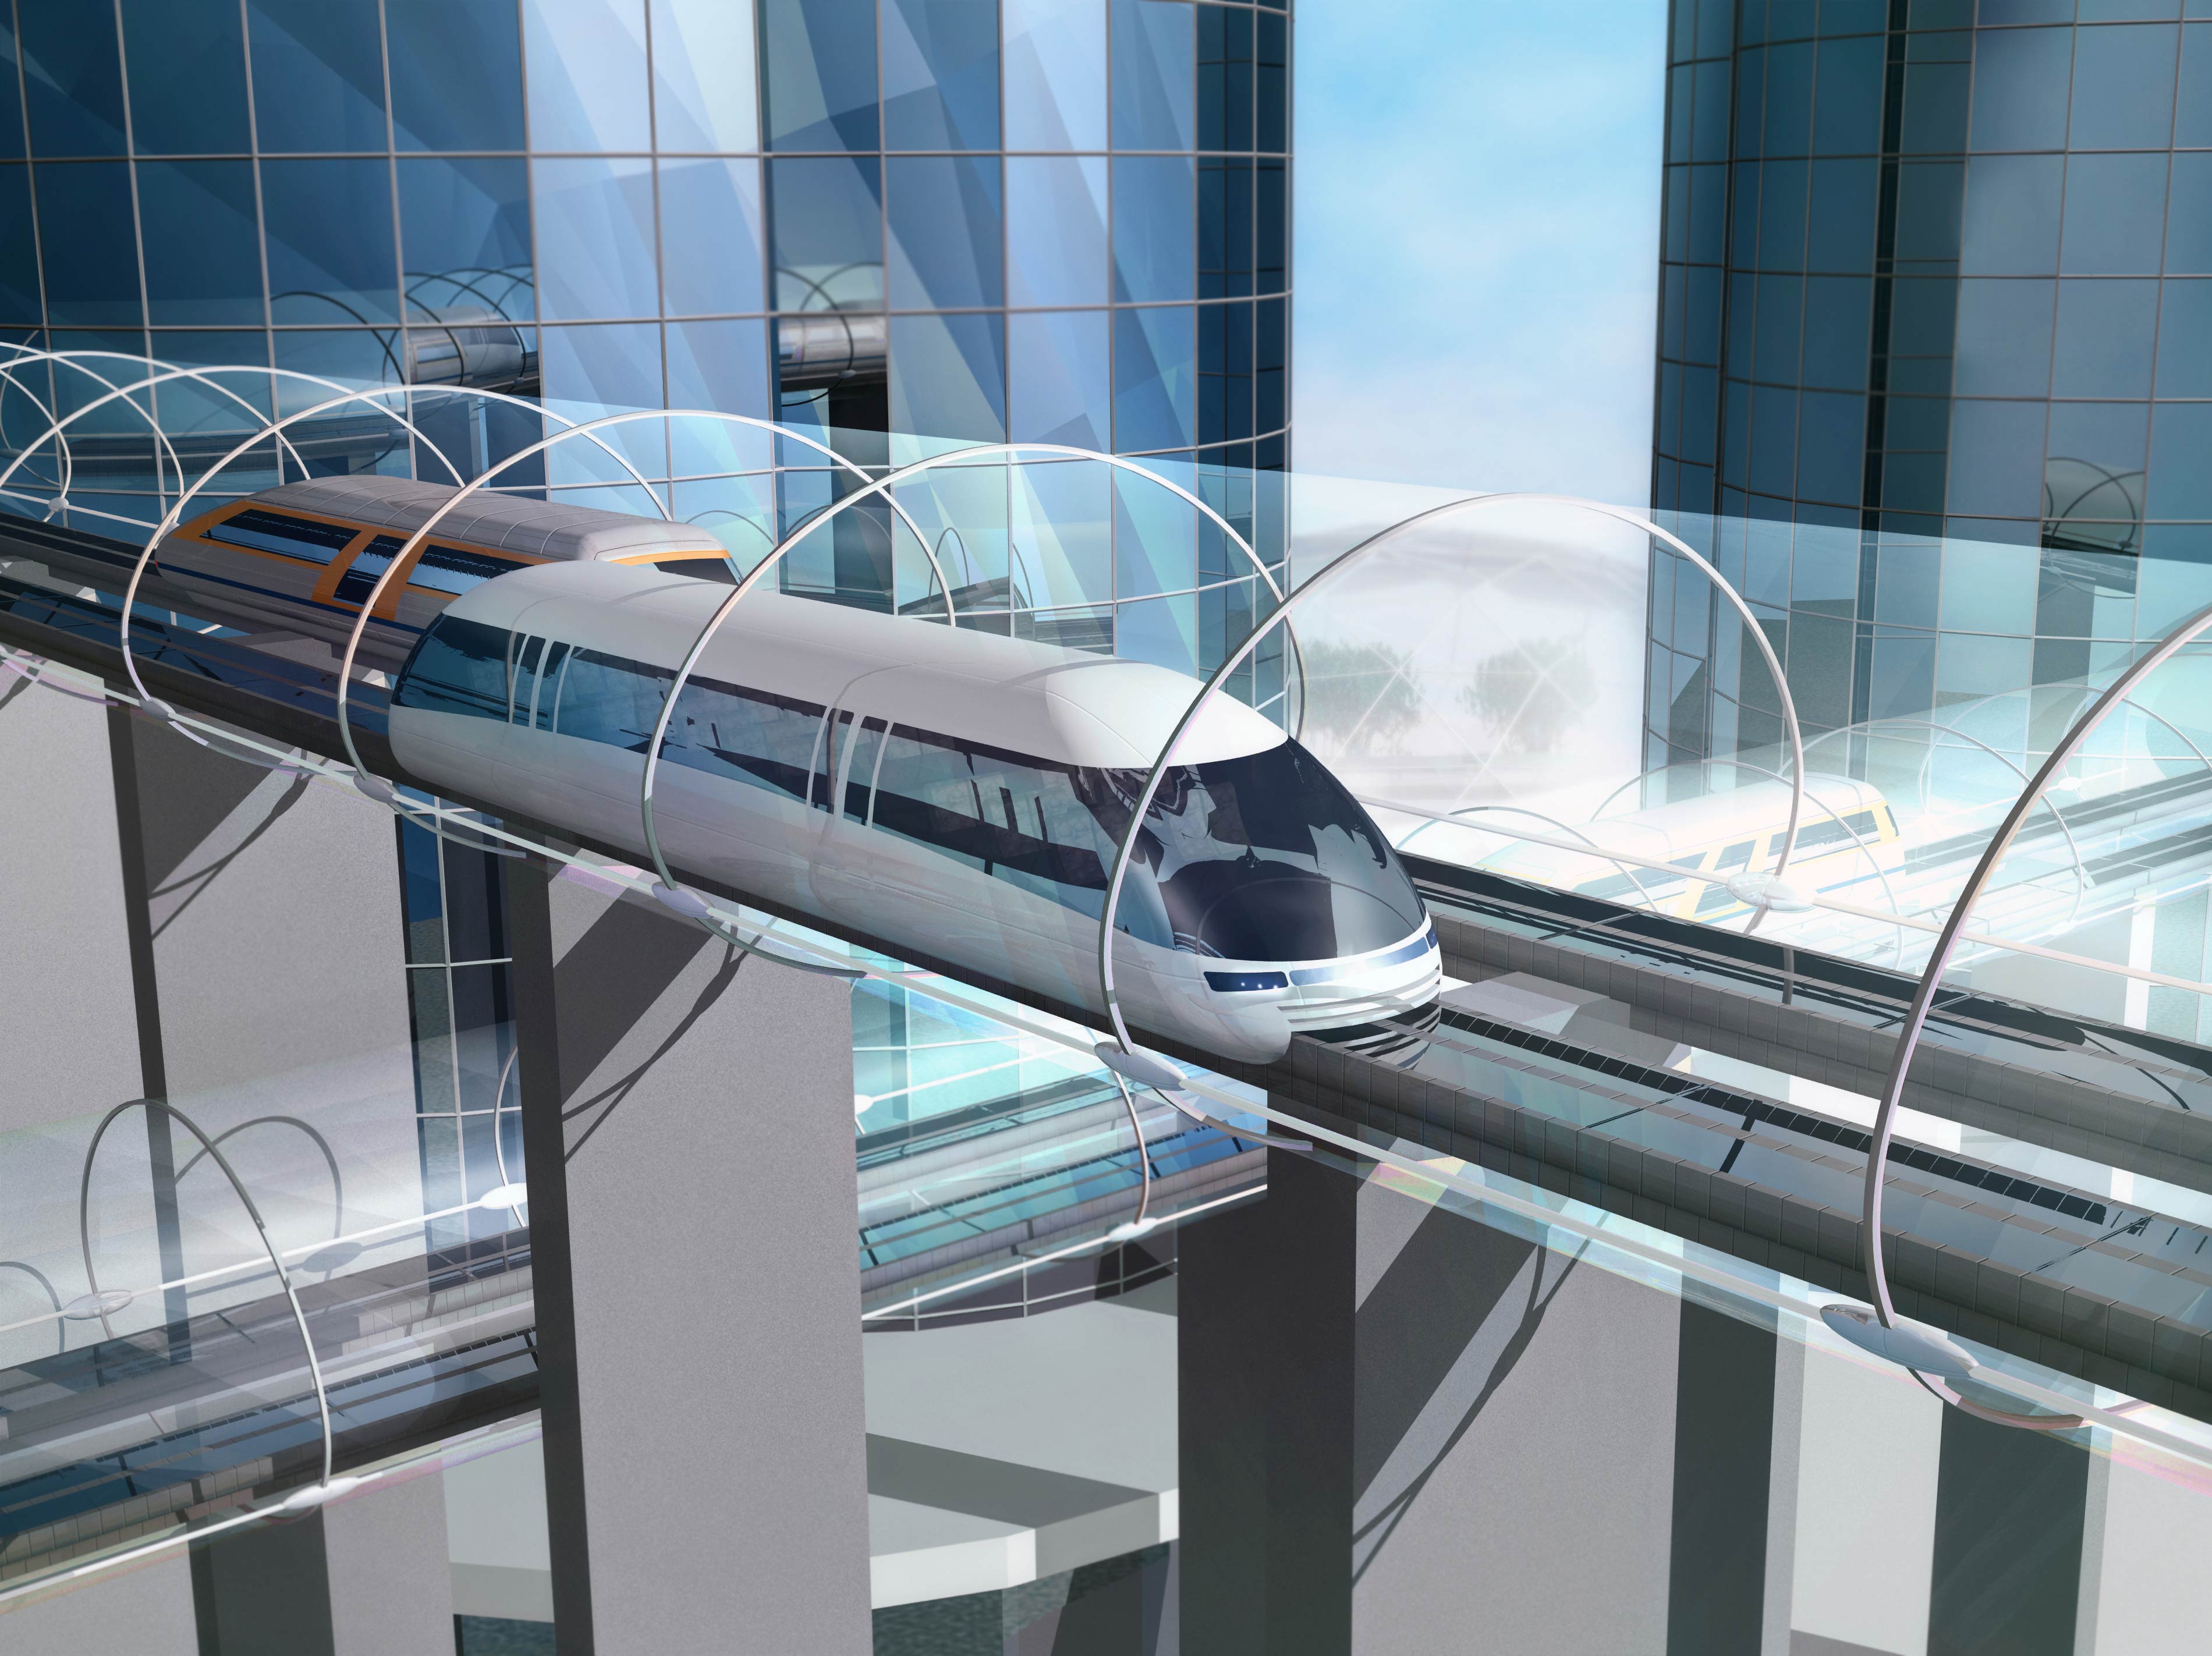 China signs a deal to begin development of supersonic trains